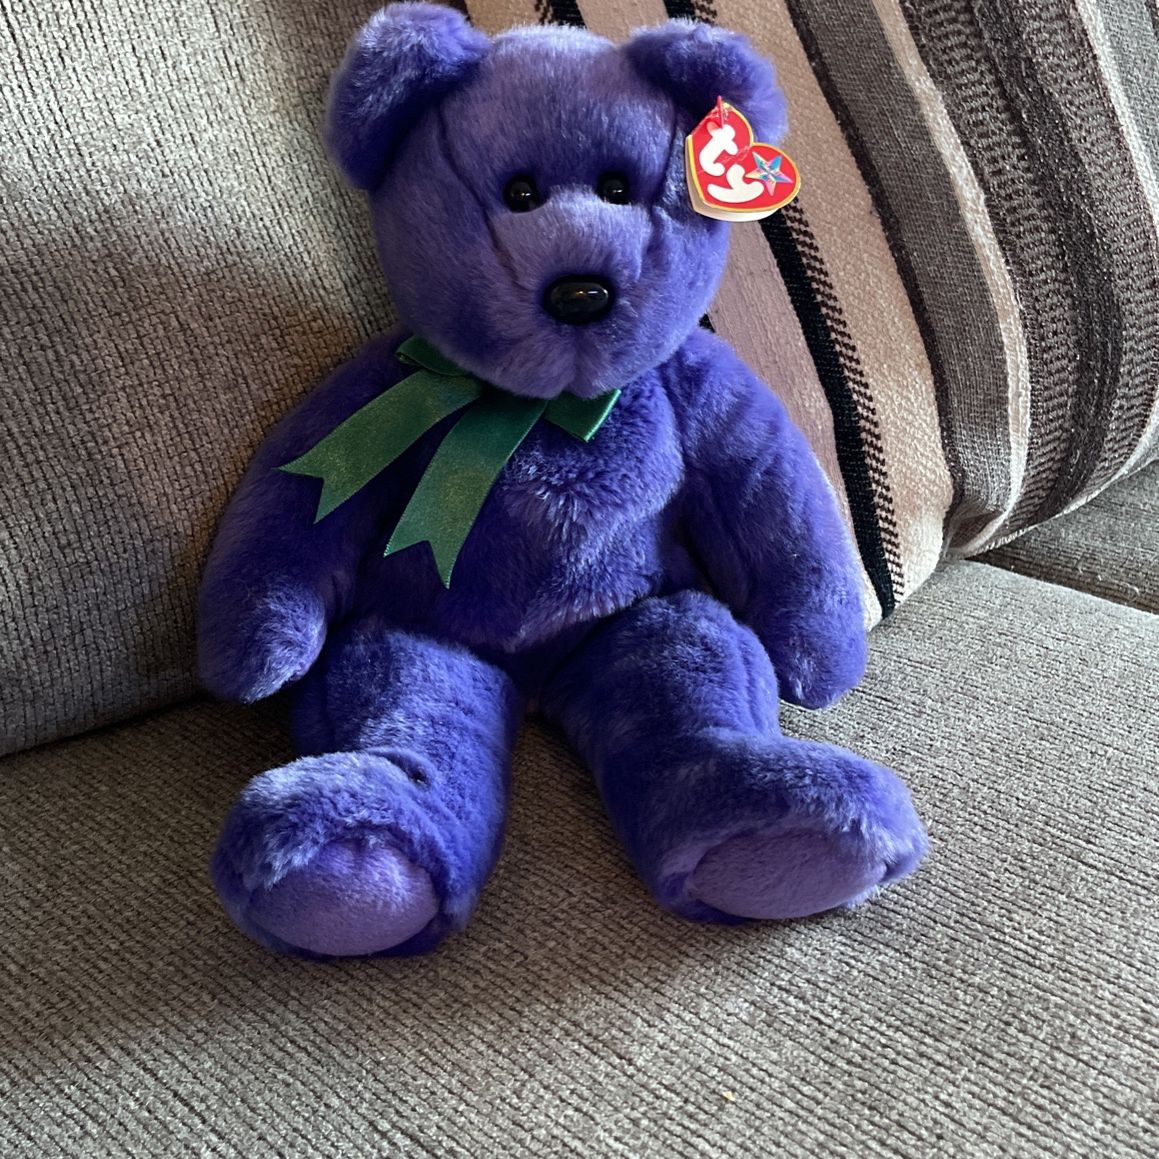 Vintage TY Retired Purple Employee Bear Beanie Baby Buddy Collection 2000